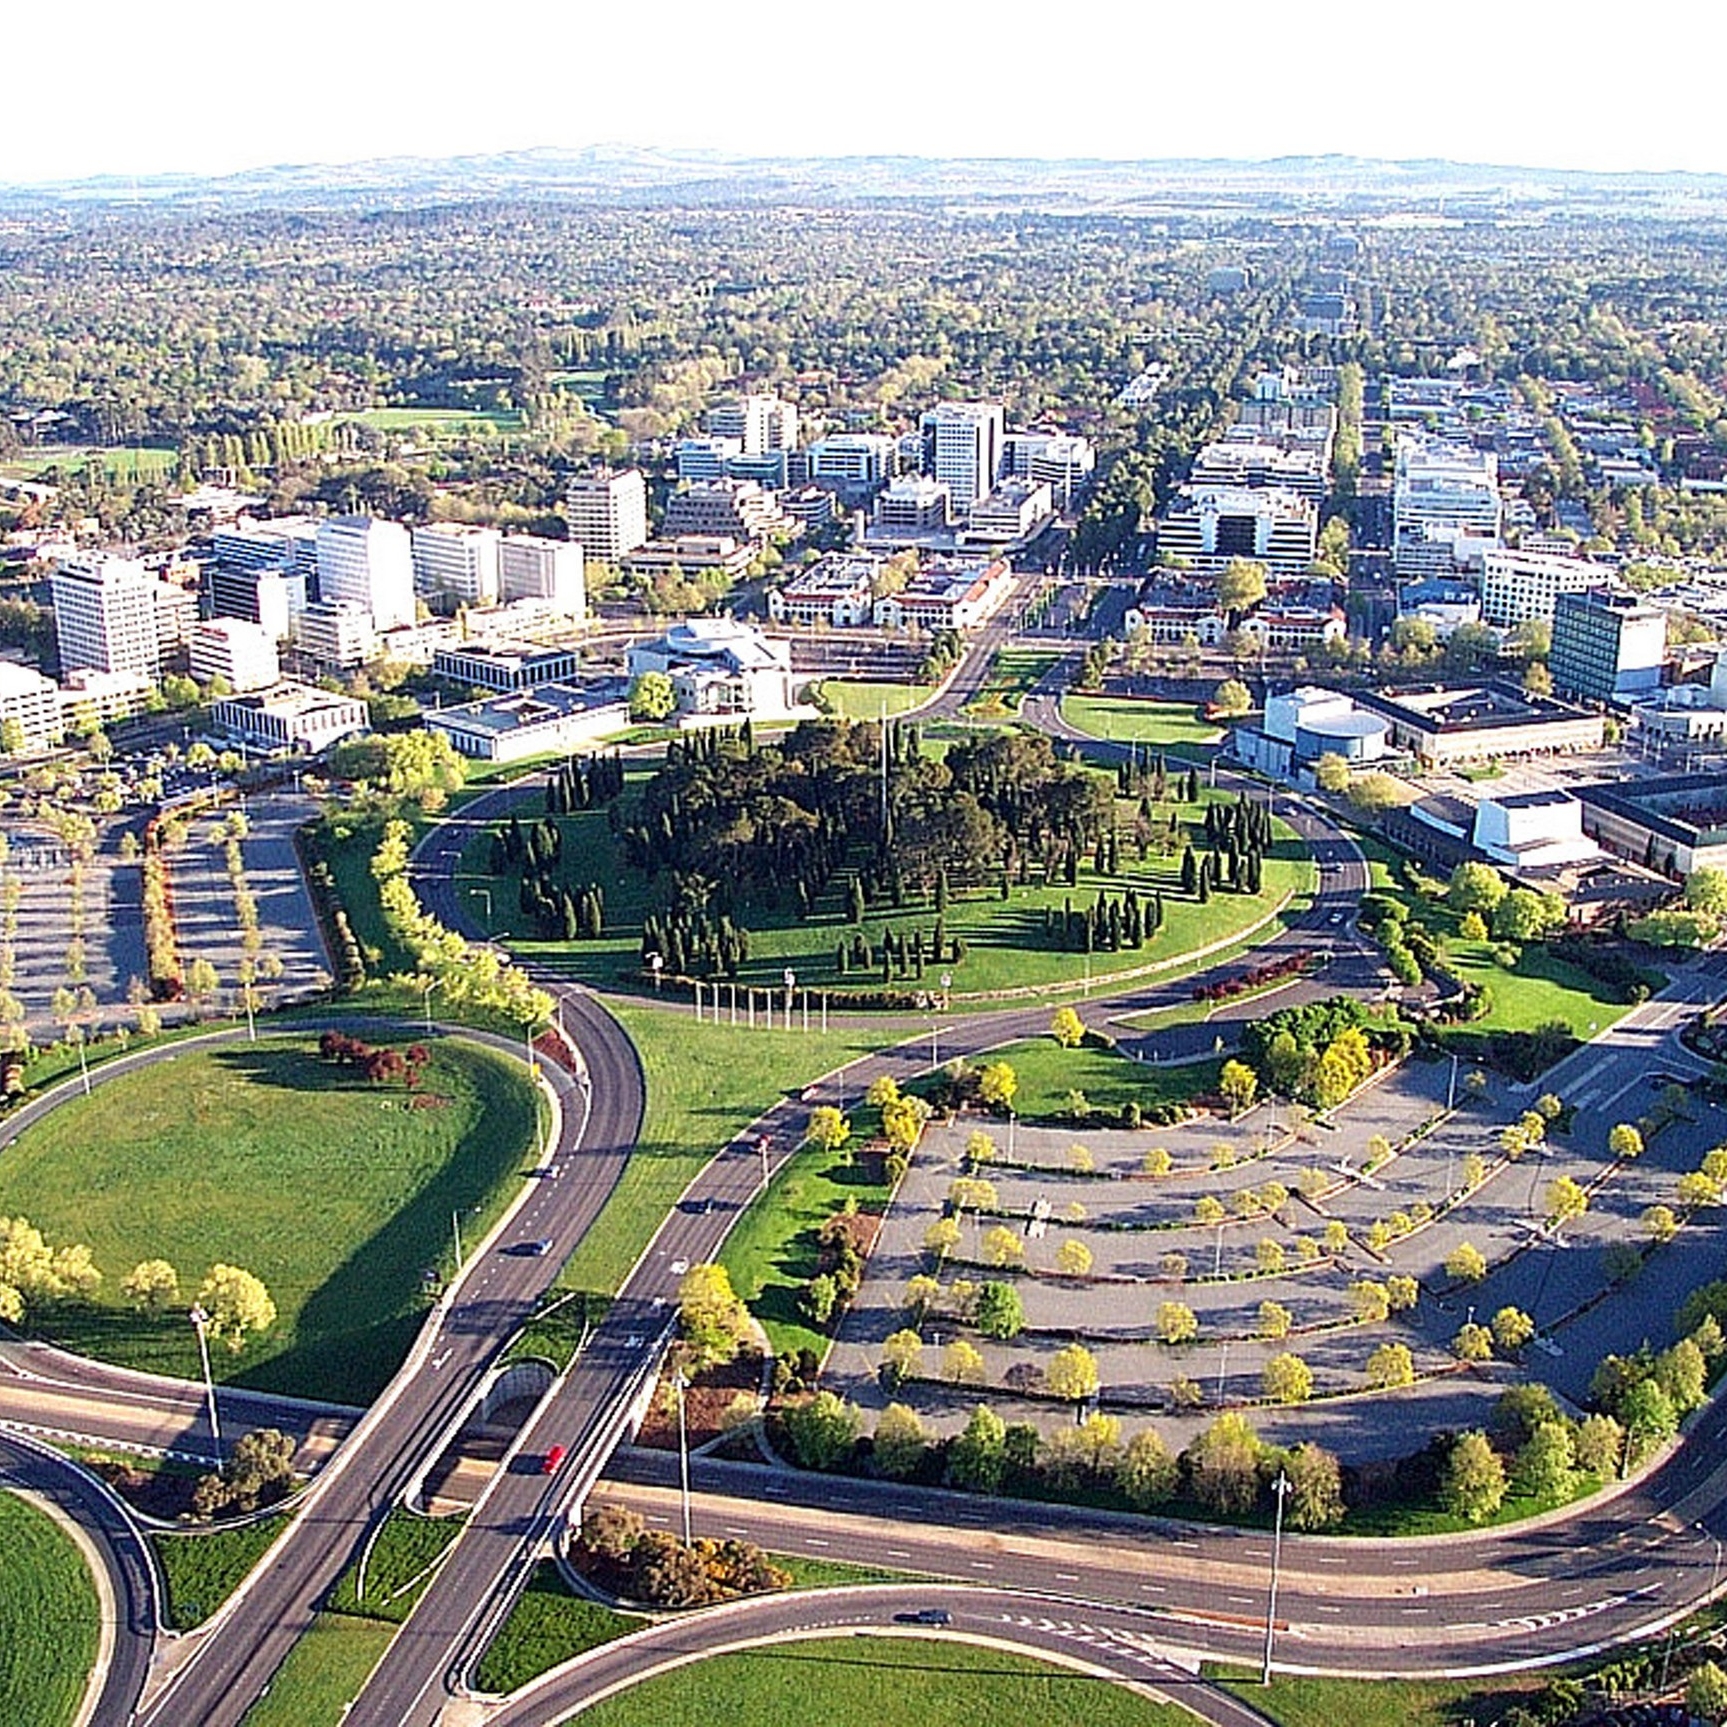 An aerial view of the city of Canberra, Canberra, Australian Capital Territory © VisitCanberra